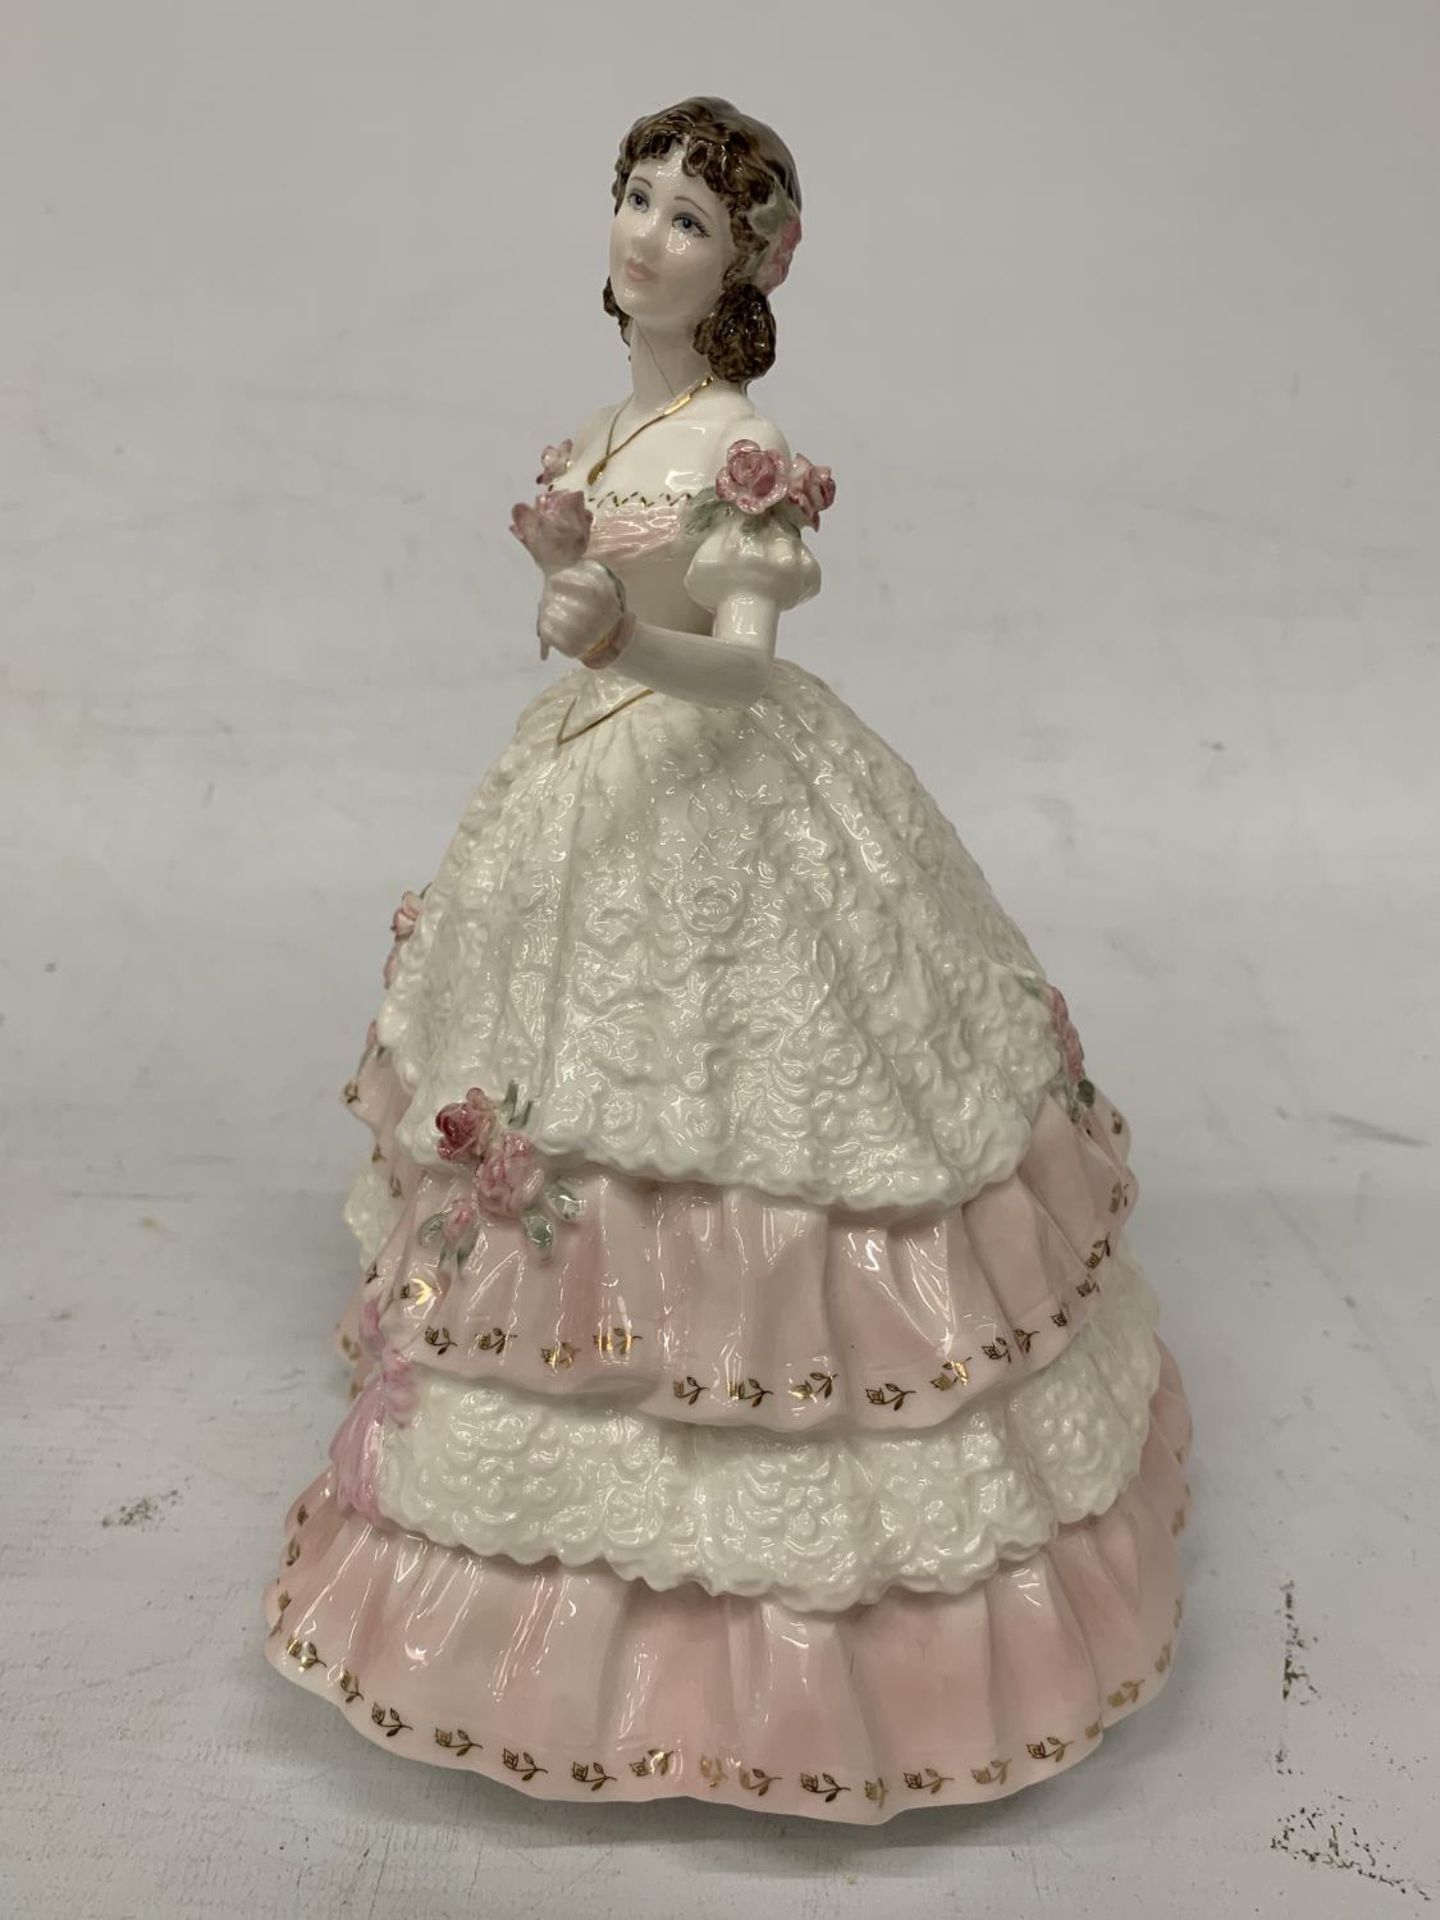 A COALPORT FIGURINE "OLIVIA" COALPORT HEIRLOOM FIGURINE OF THE YEAR 1997 ISSUED STRICTLY TO 1997 - Image 2 of 5